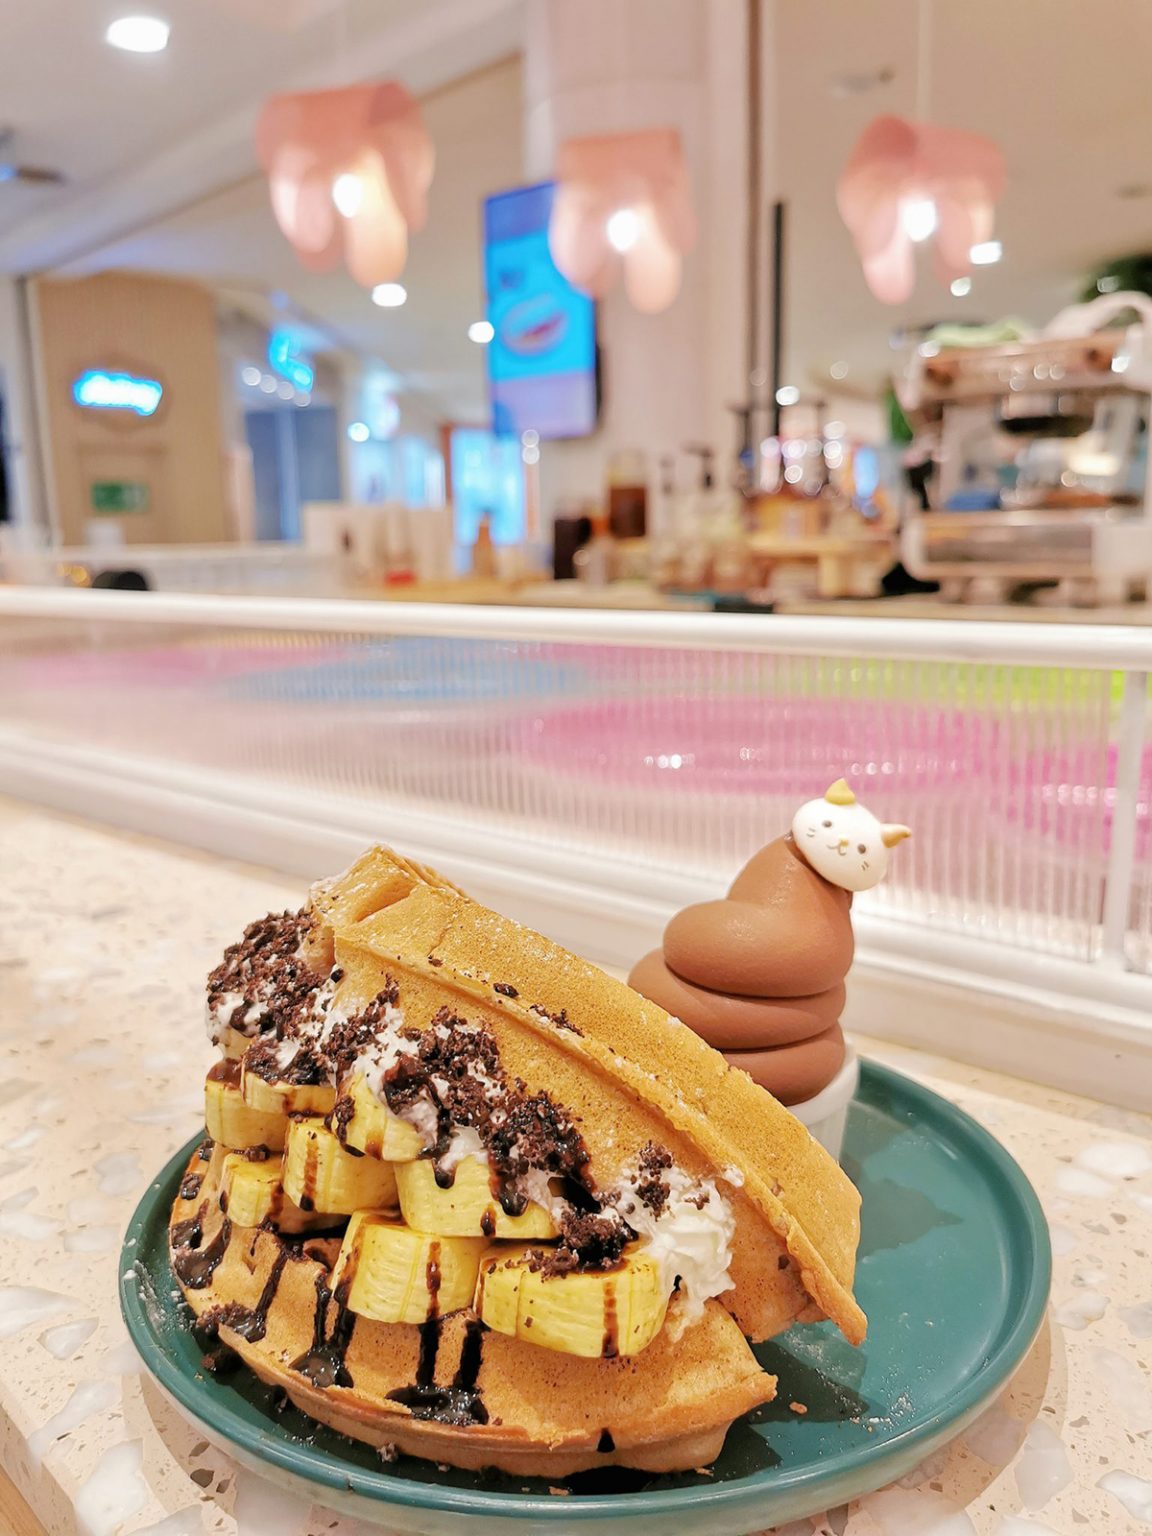 Loved by many, the chocolate banana waffle also comes with appetising cocoa crumbs – how can you say no to that? Ludwig